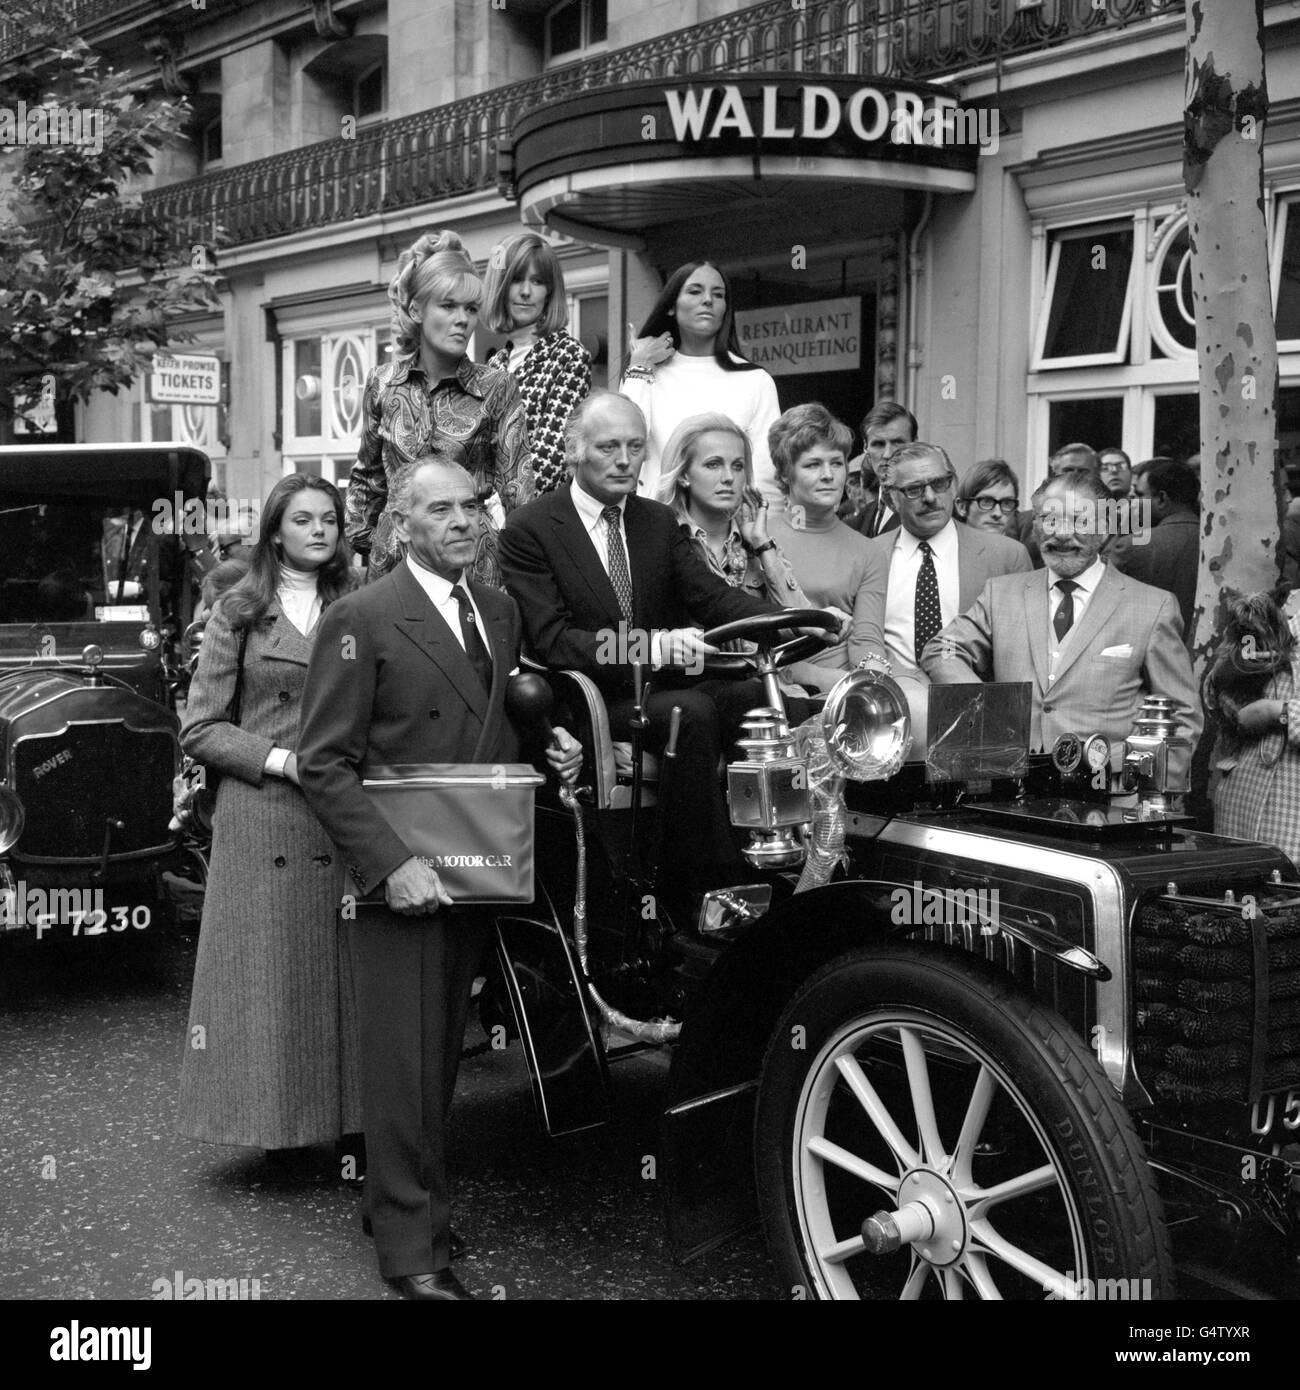 Lord Montagu of Beaulieu, at the wheel of a 1903 Gladiator, one of the veteran cars driven to the Waldorf Hotel, Aldwych, London for a reception to mark the publication of The History of the Motor Car. Standing beside him is Mr G Grampini, who was in 1928 a driver in the Alfa Romeo racing team at Brooklands. Passengers are some of the women motoring personalities who attended the reception. Stock Photo